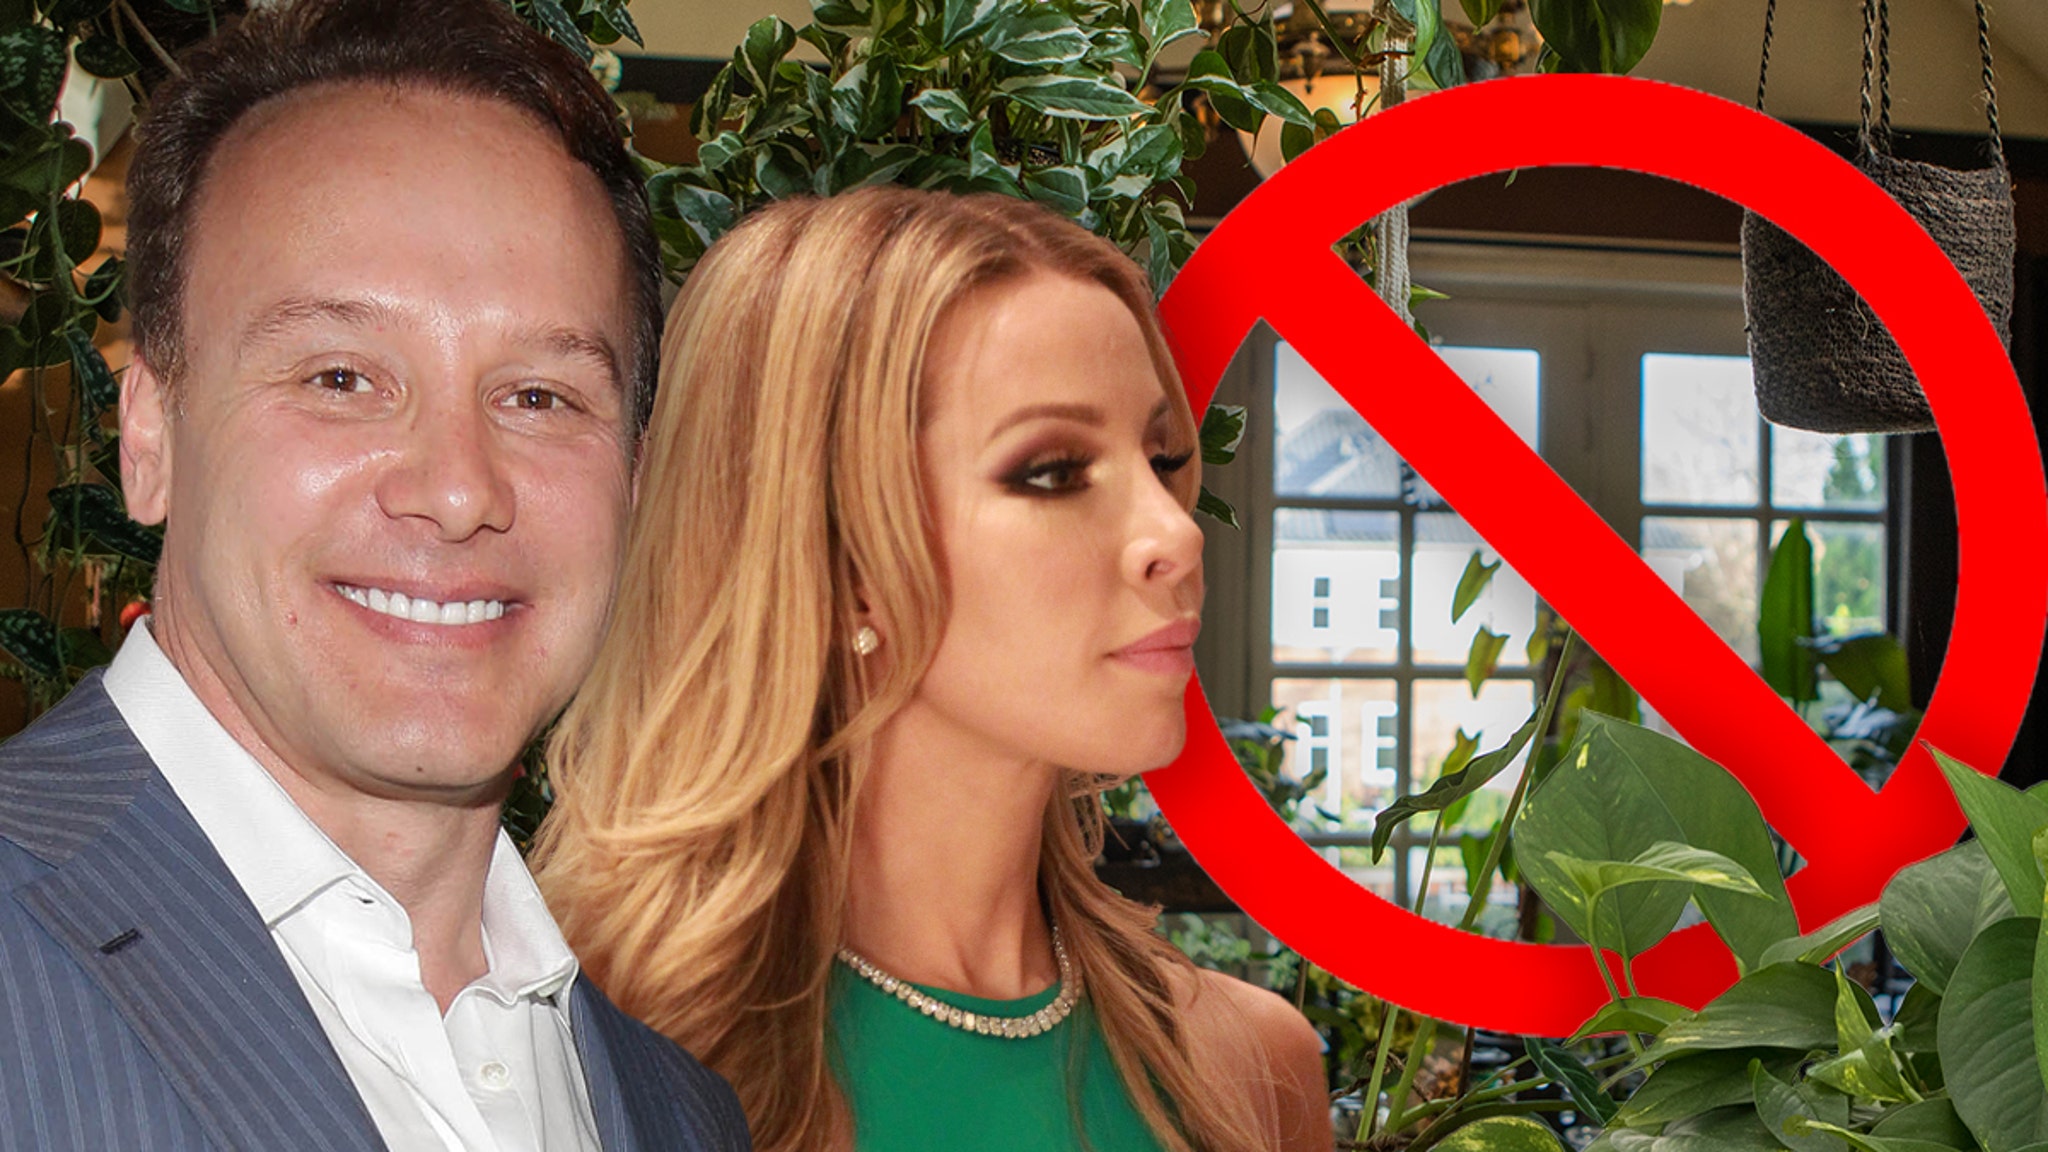 Lenny Hochstein Sues Over Plants Removed From Home While Lisa Moved Out